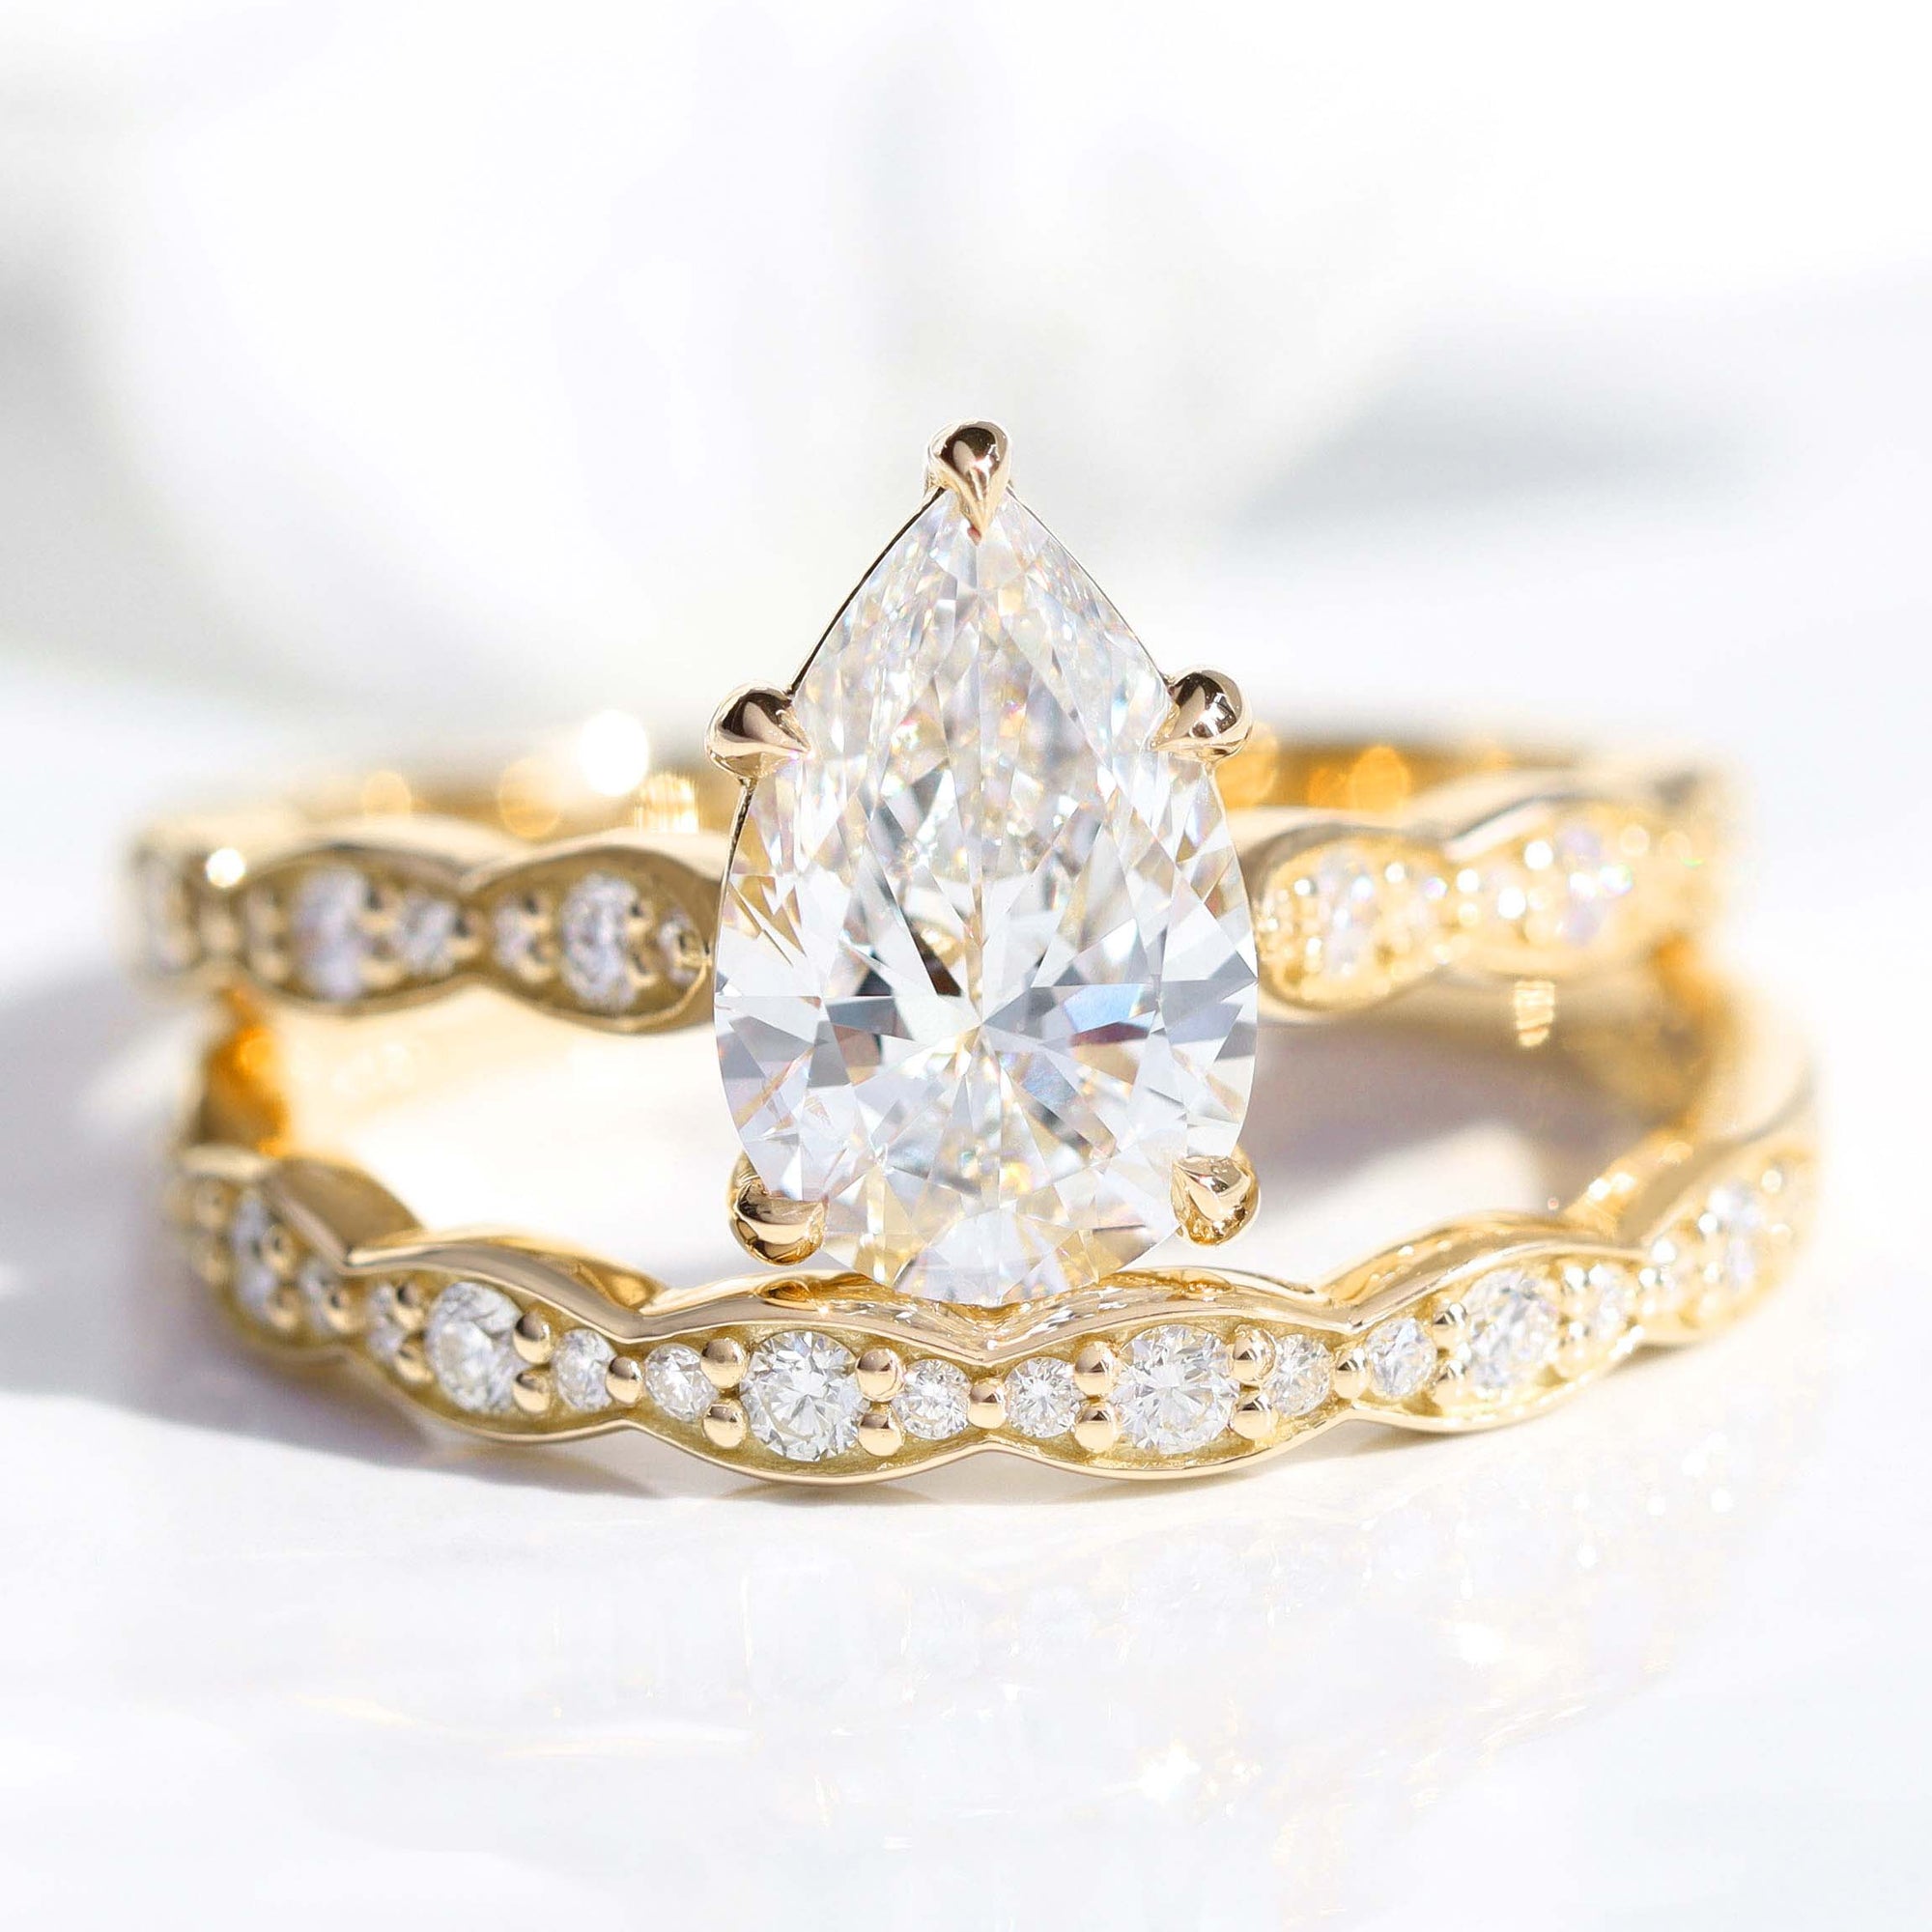 lab diamond ring bridal set yellow gold pear diamond solitaire engagement ring La More Design Jewelry